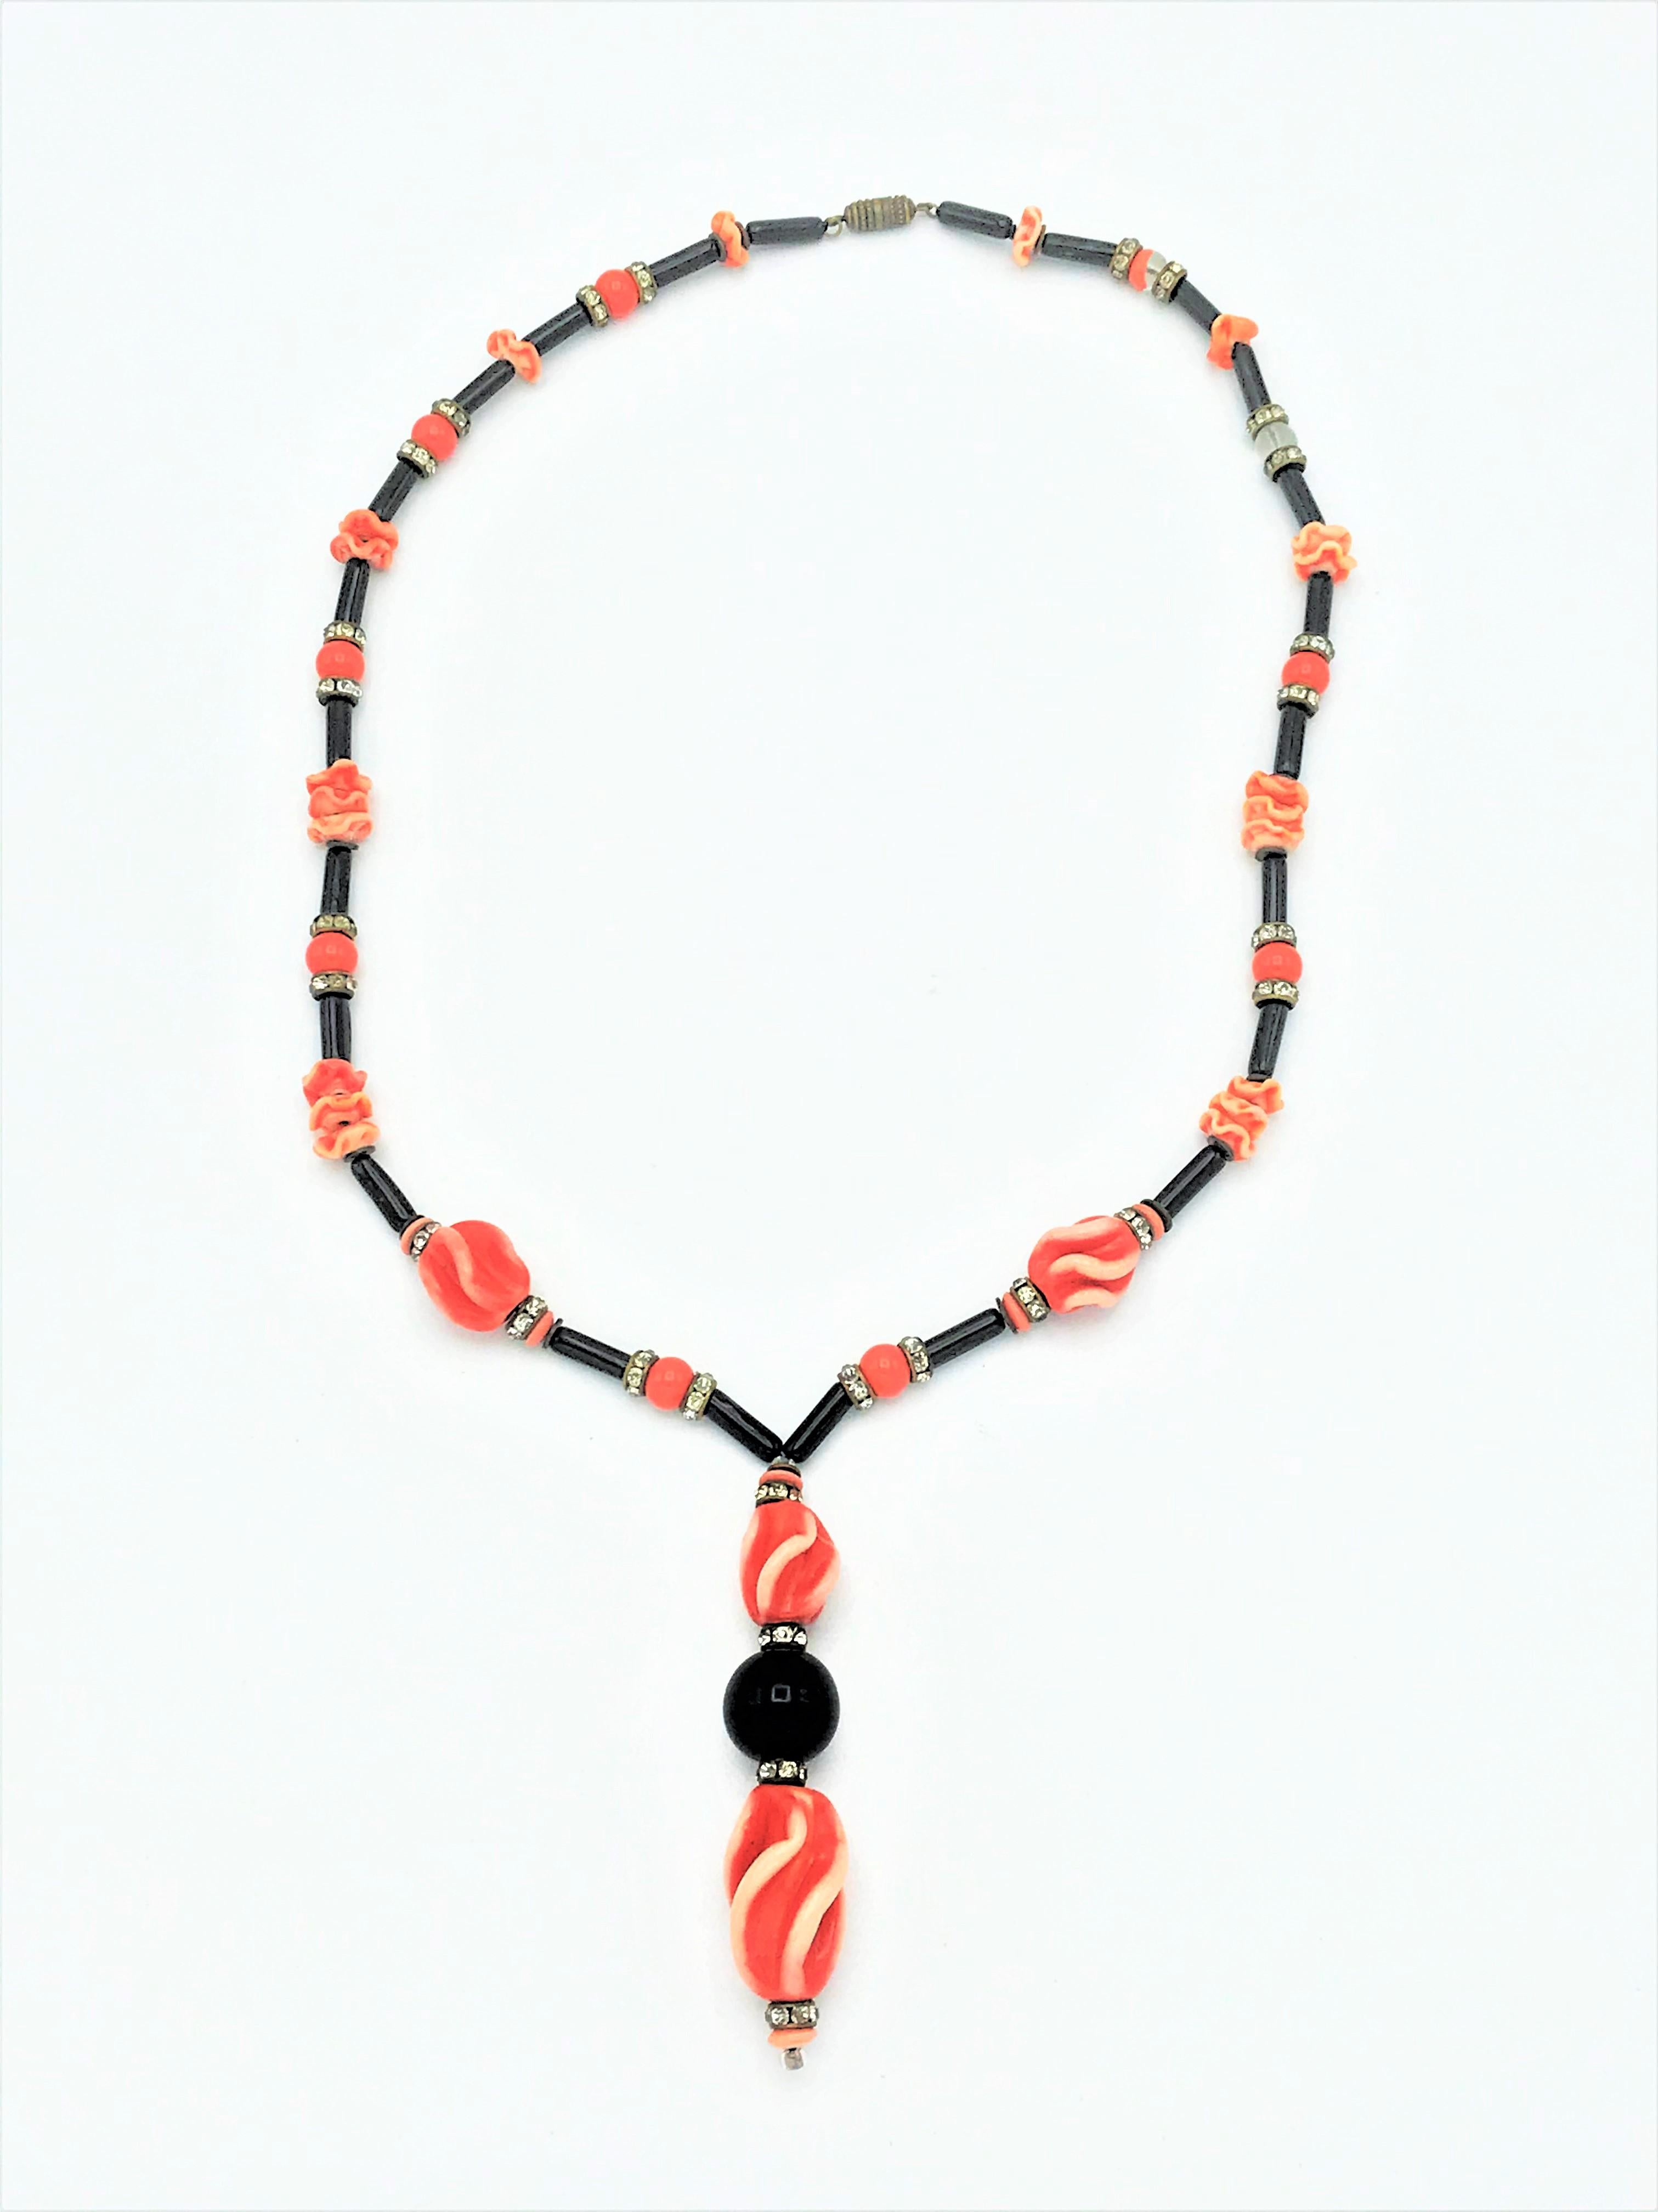 An early deco chain from France, recognizable by the rotary clasp. Consisting of black 1.2 cm long sticks, rhinestone,  rosette ball in orange glass, corrugated glass balls in orange.
The black bow pin is sold separately!
Measurement: Total length